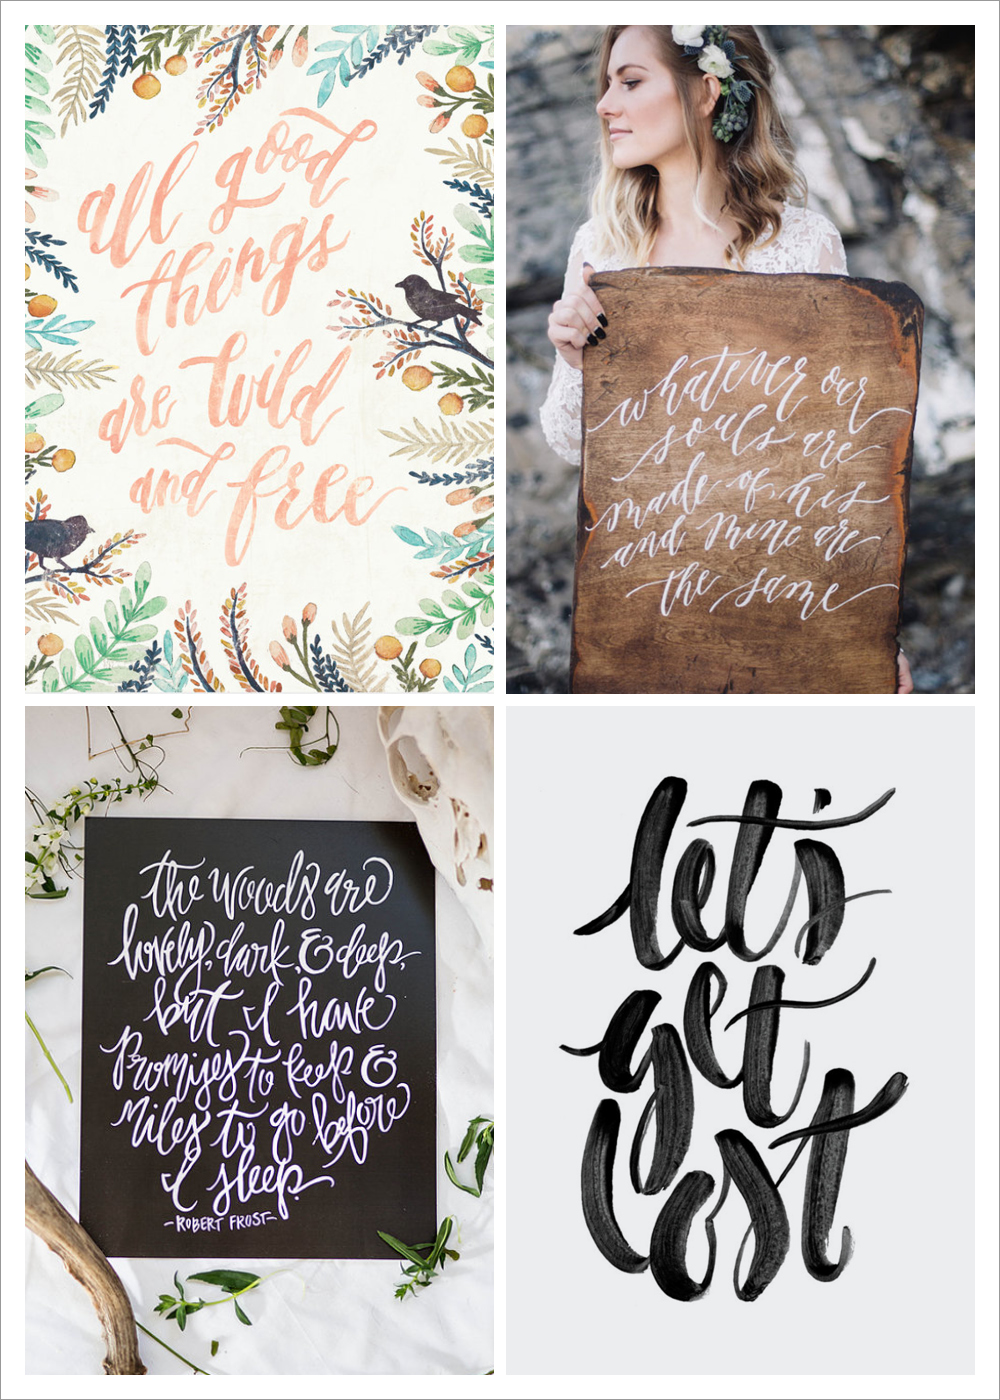 Rustic Calligraphy Inspiration via Happy Hands Project